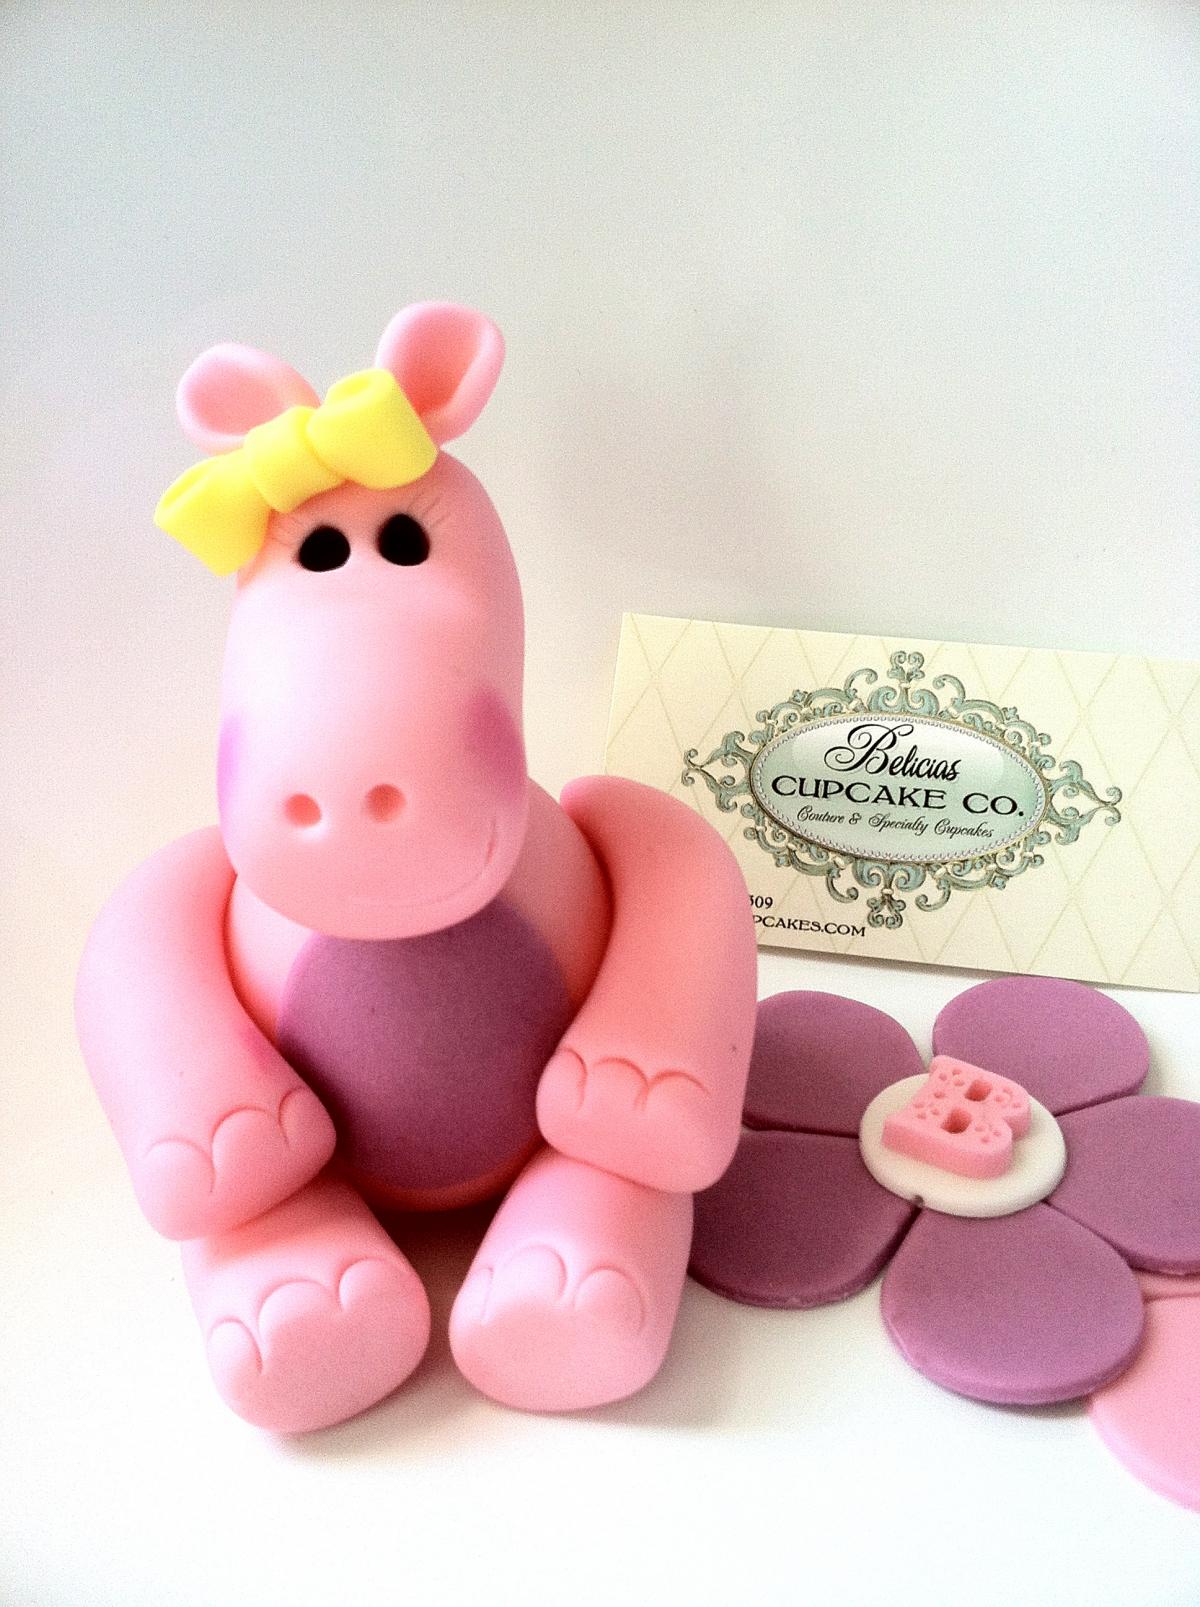 Fondant Hippo Cake Topper Along With Birthday Name On Flower Petals , This Is Perfect For That Animal Lover Or Any Pink Girly Party